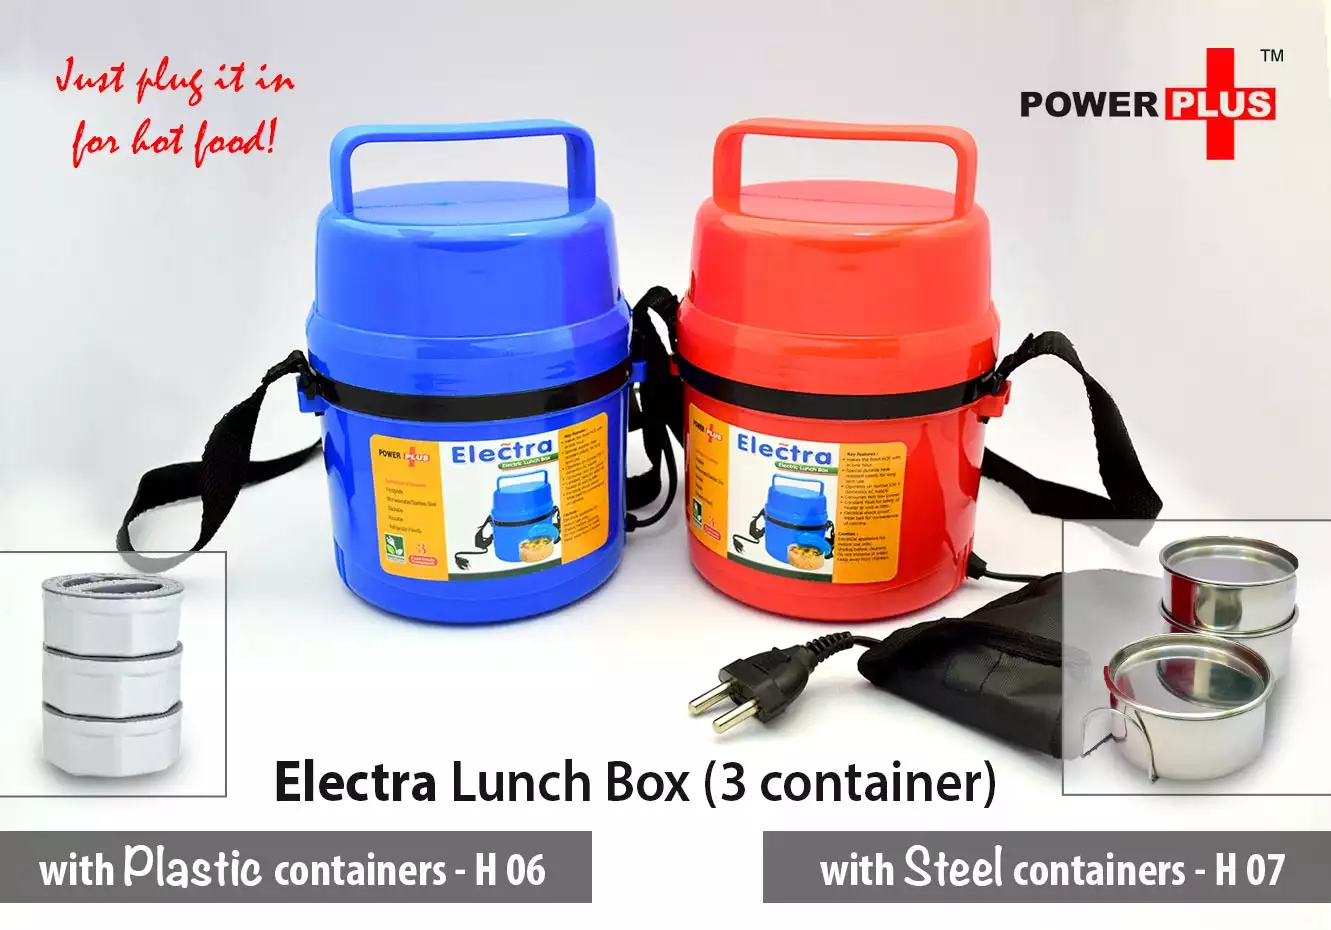 Electra Lunch Box Steel – 3 Container